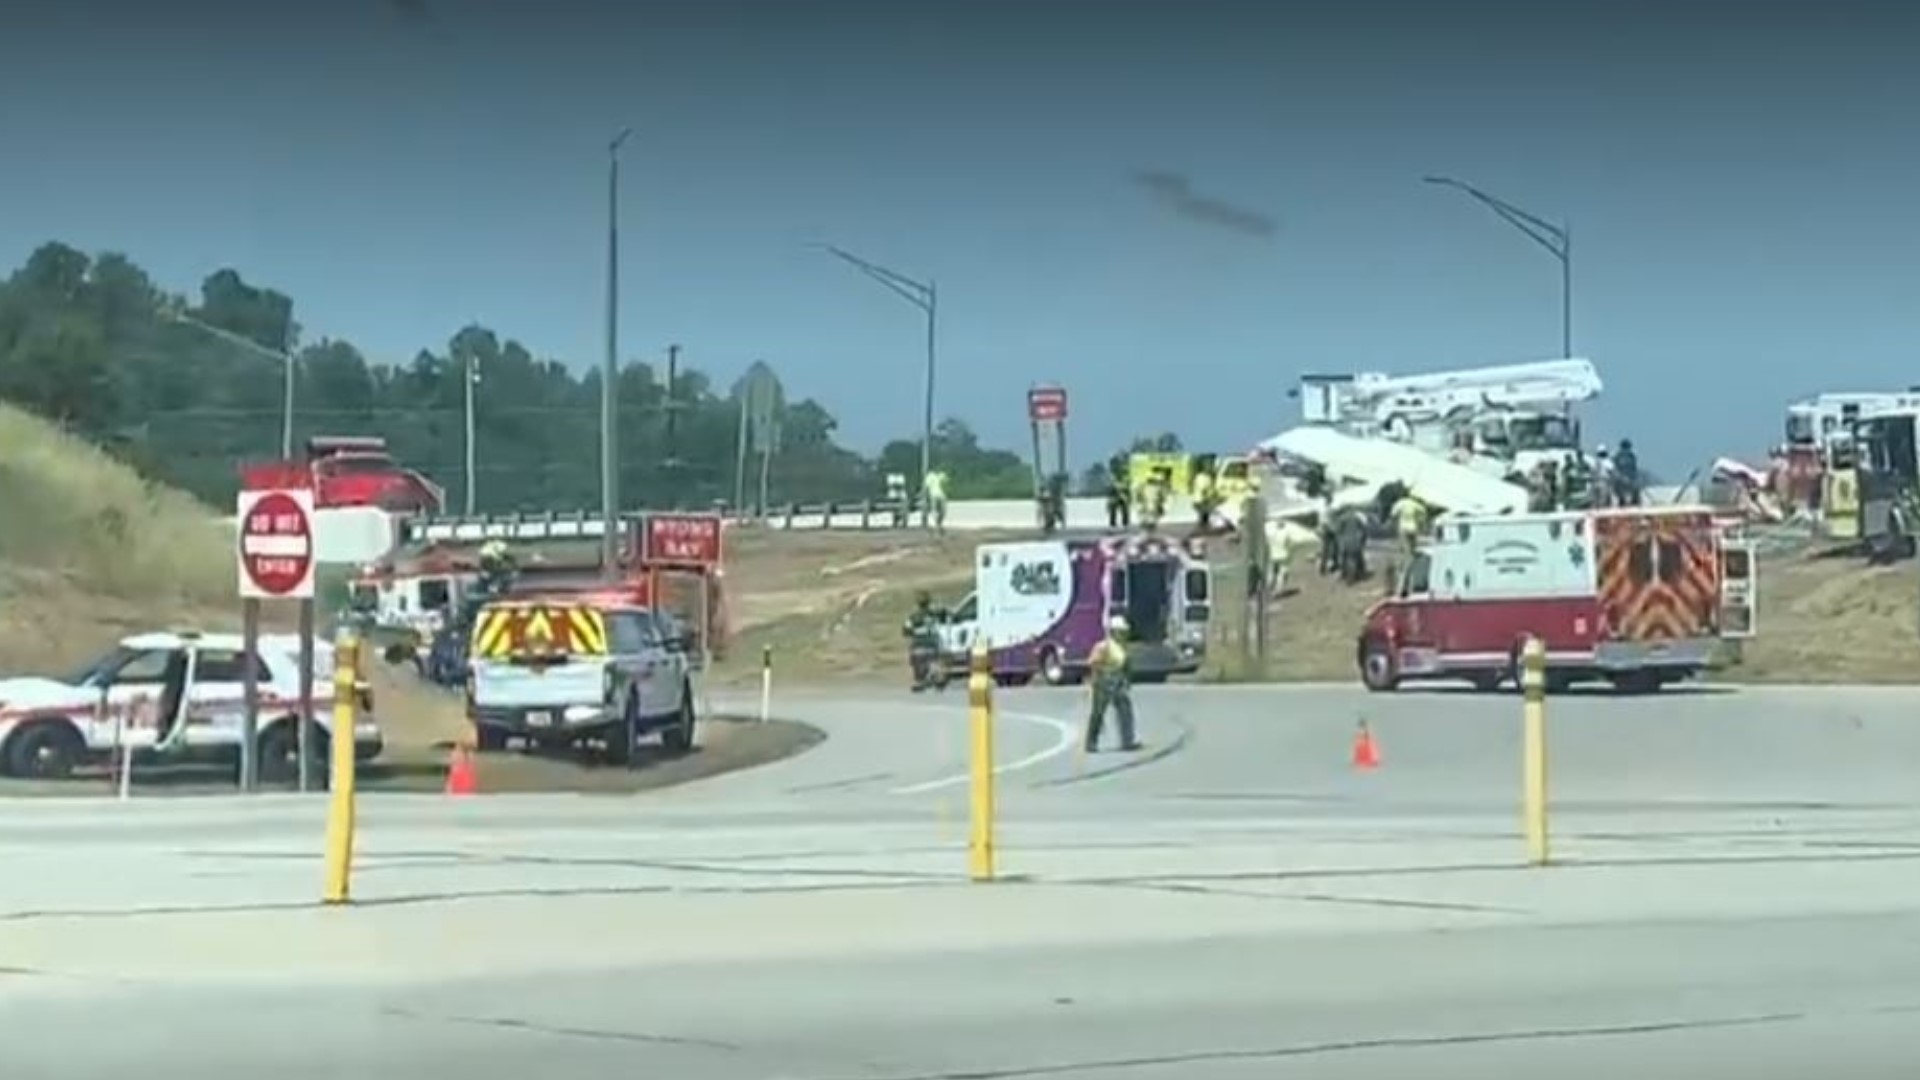 The crash reportedly happened at 2:30 p.m. and injured two. The FAA is responding.